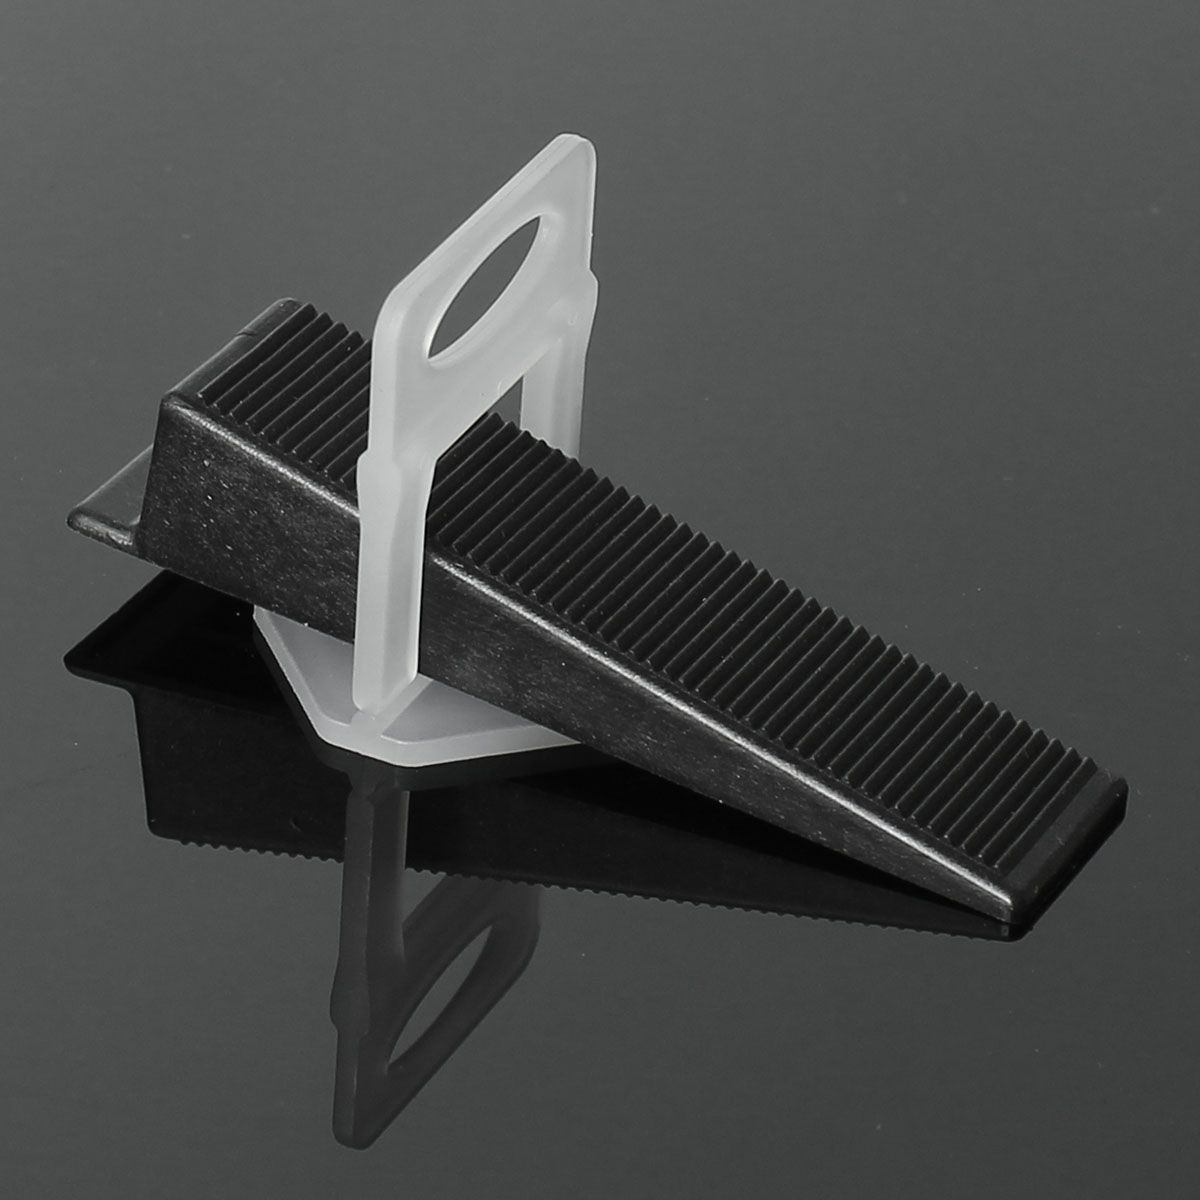 50Pcs-Black-Tile-Flat-Leveling-System-Wedges-Clips-Wall-Floor-Spacers-Strap-Device-Tools-1427127